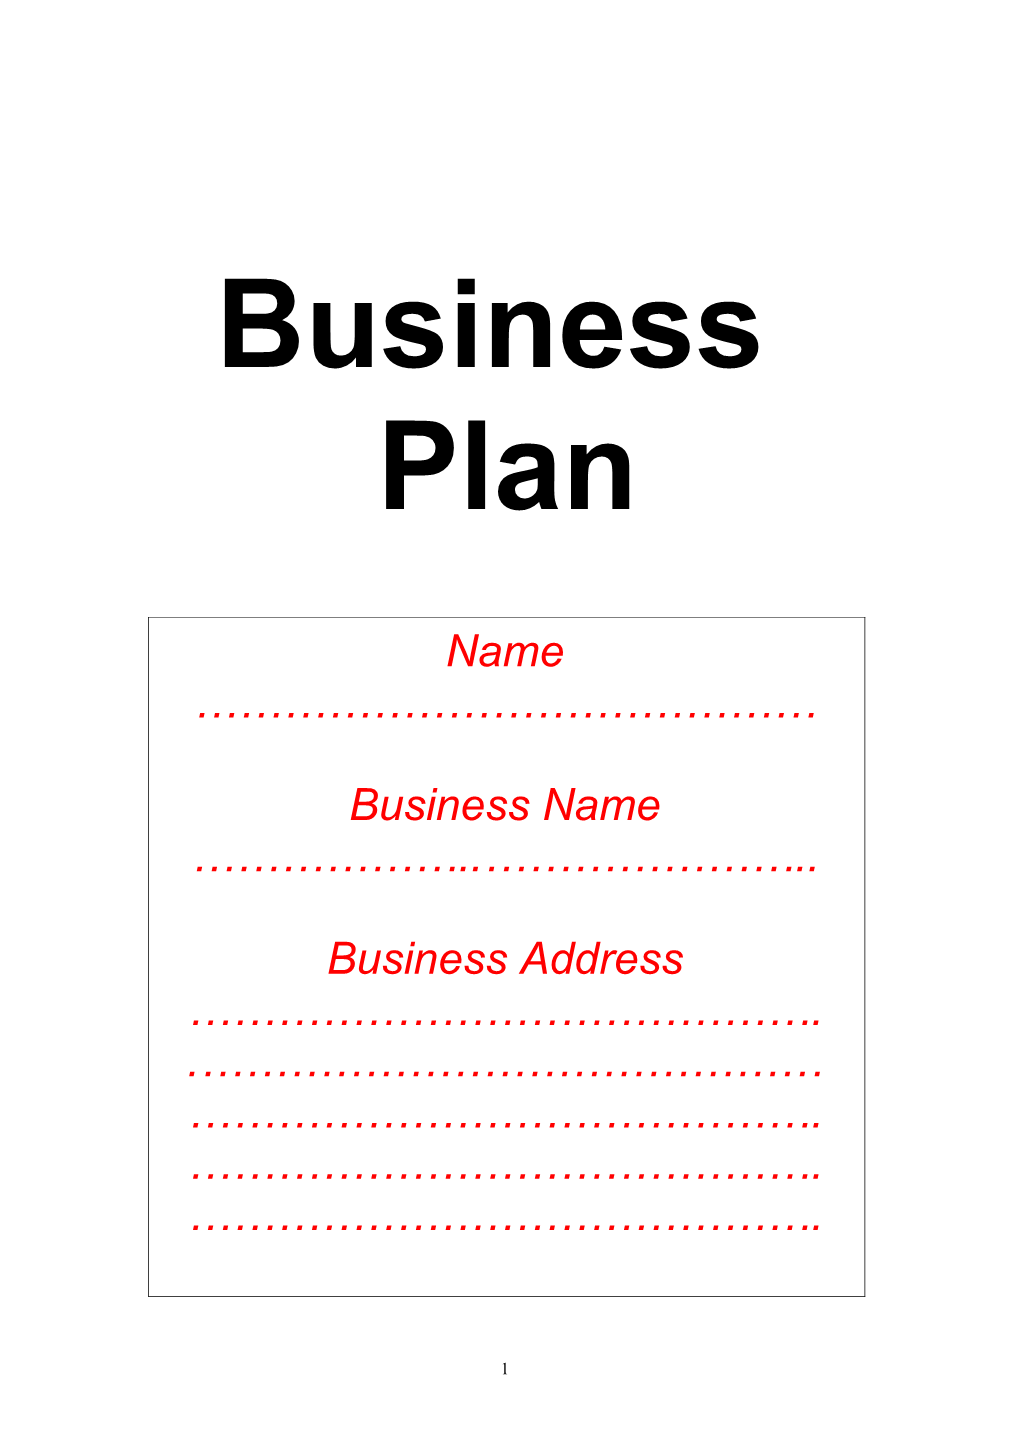 Name, Business Name, Business Address